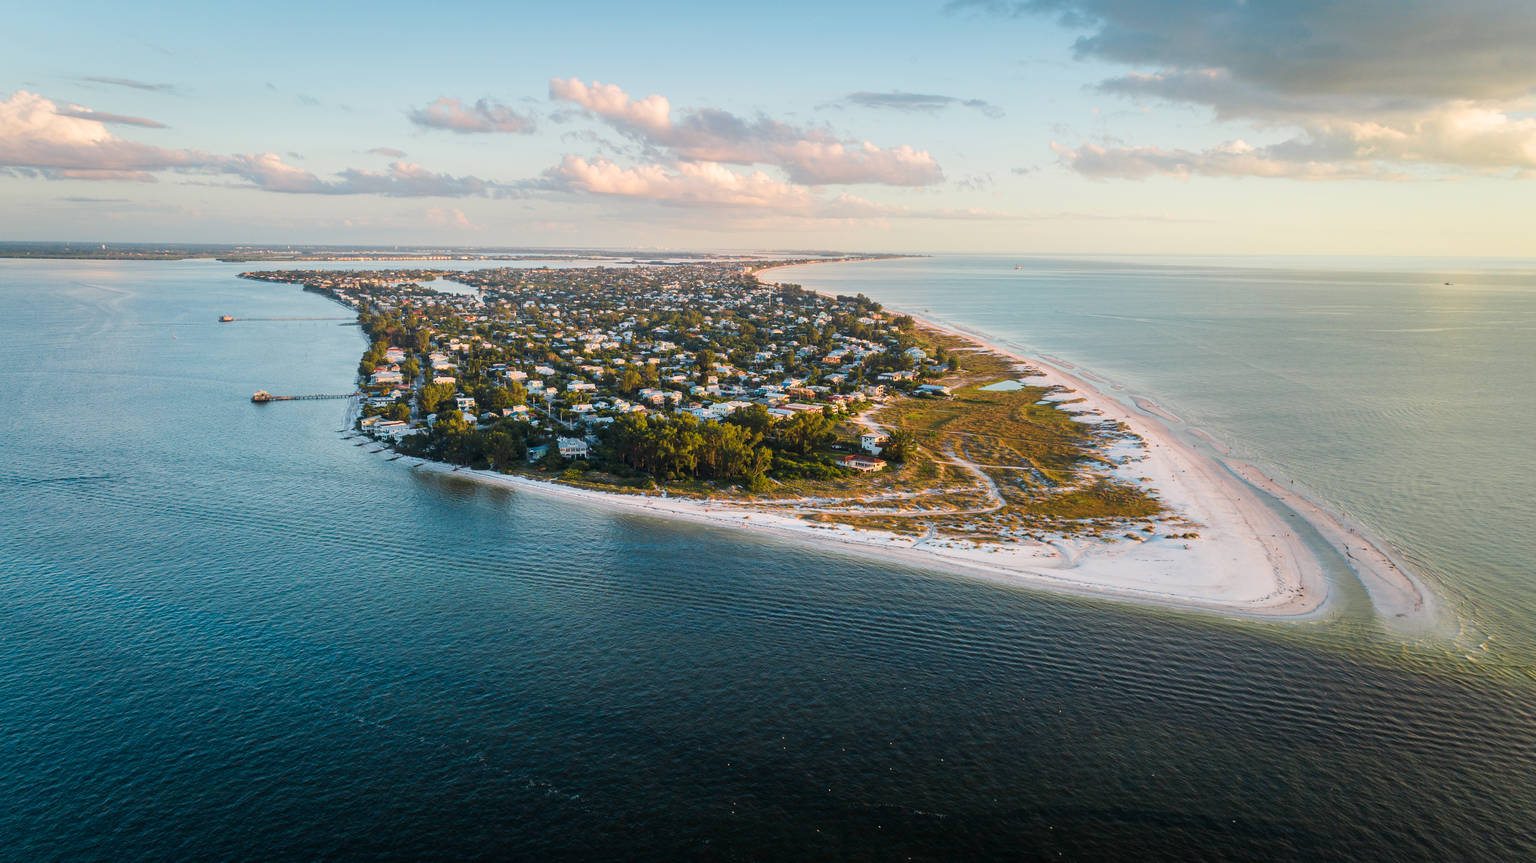 Anna Maria Island, Florida Vacation Rentals: Condos, Cottages, and House Rentals & More